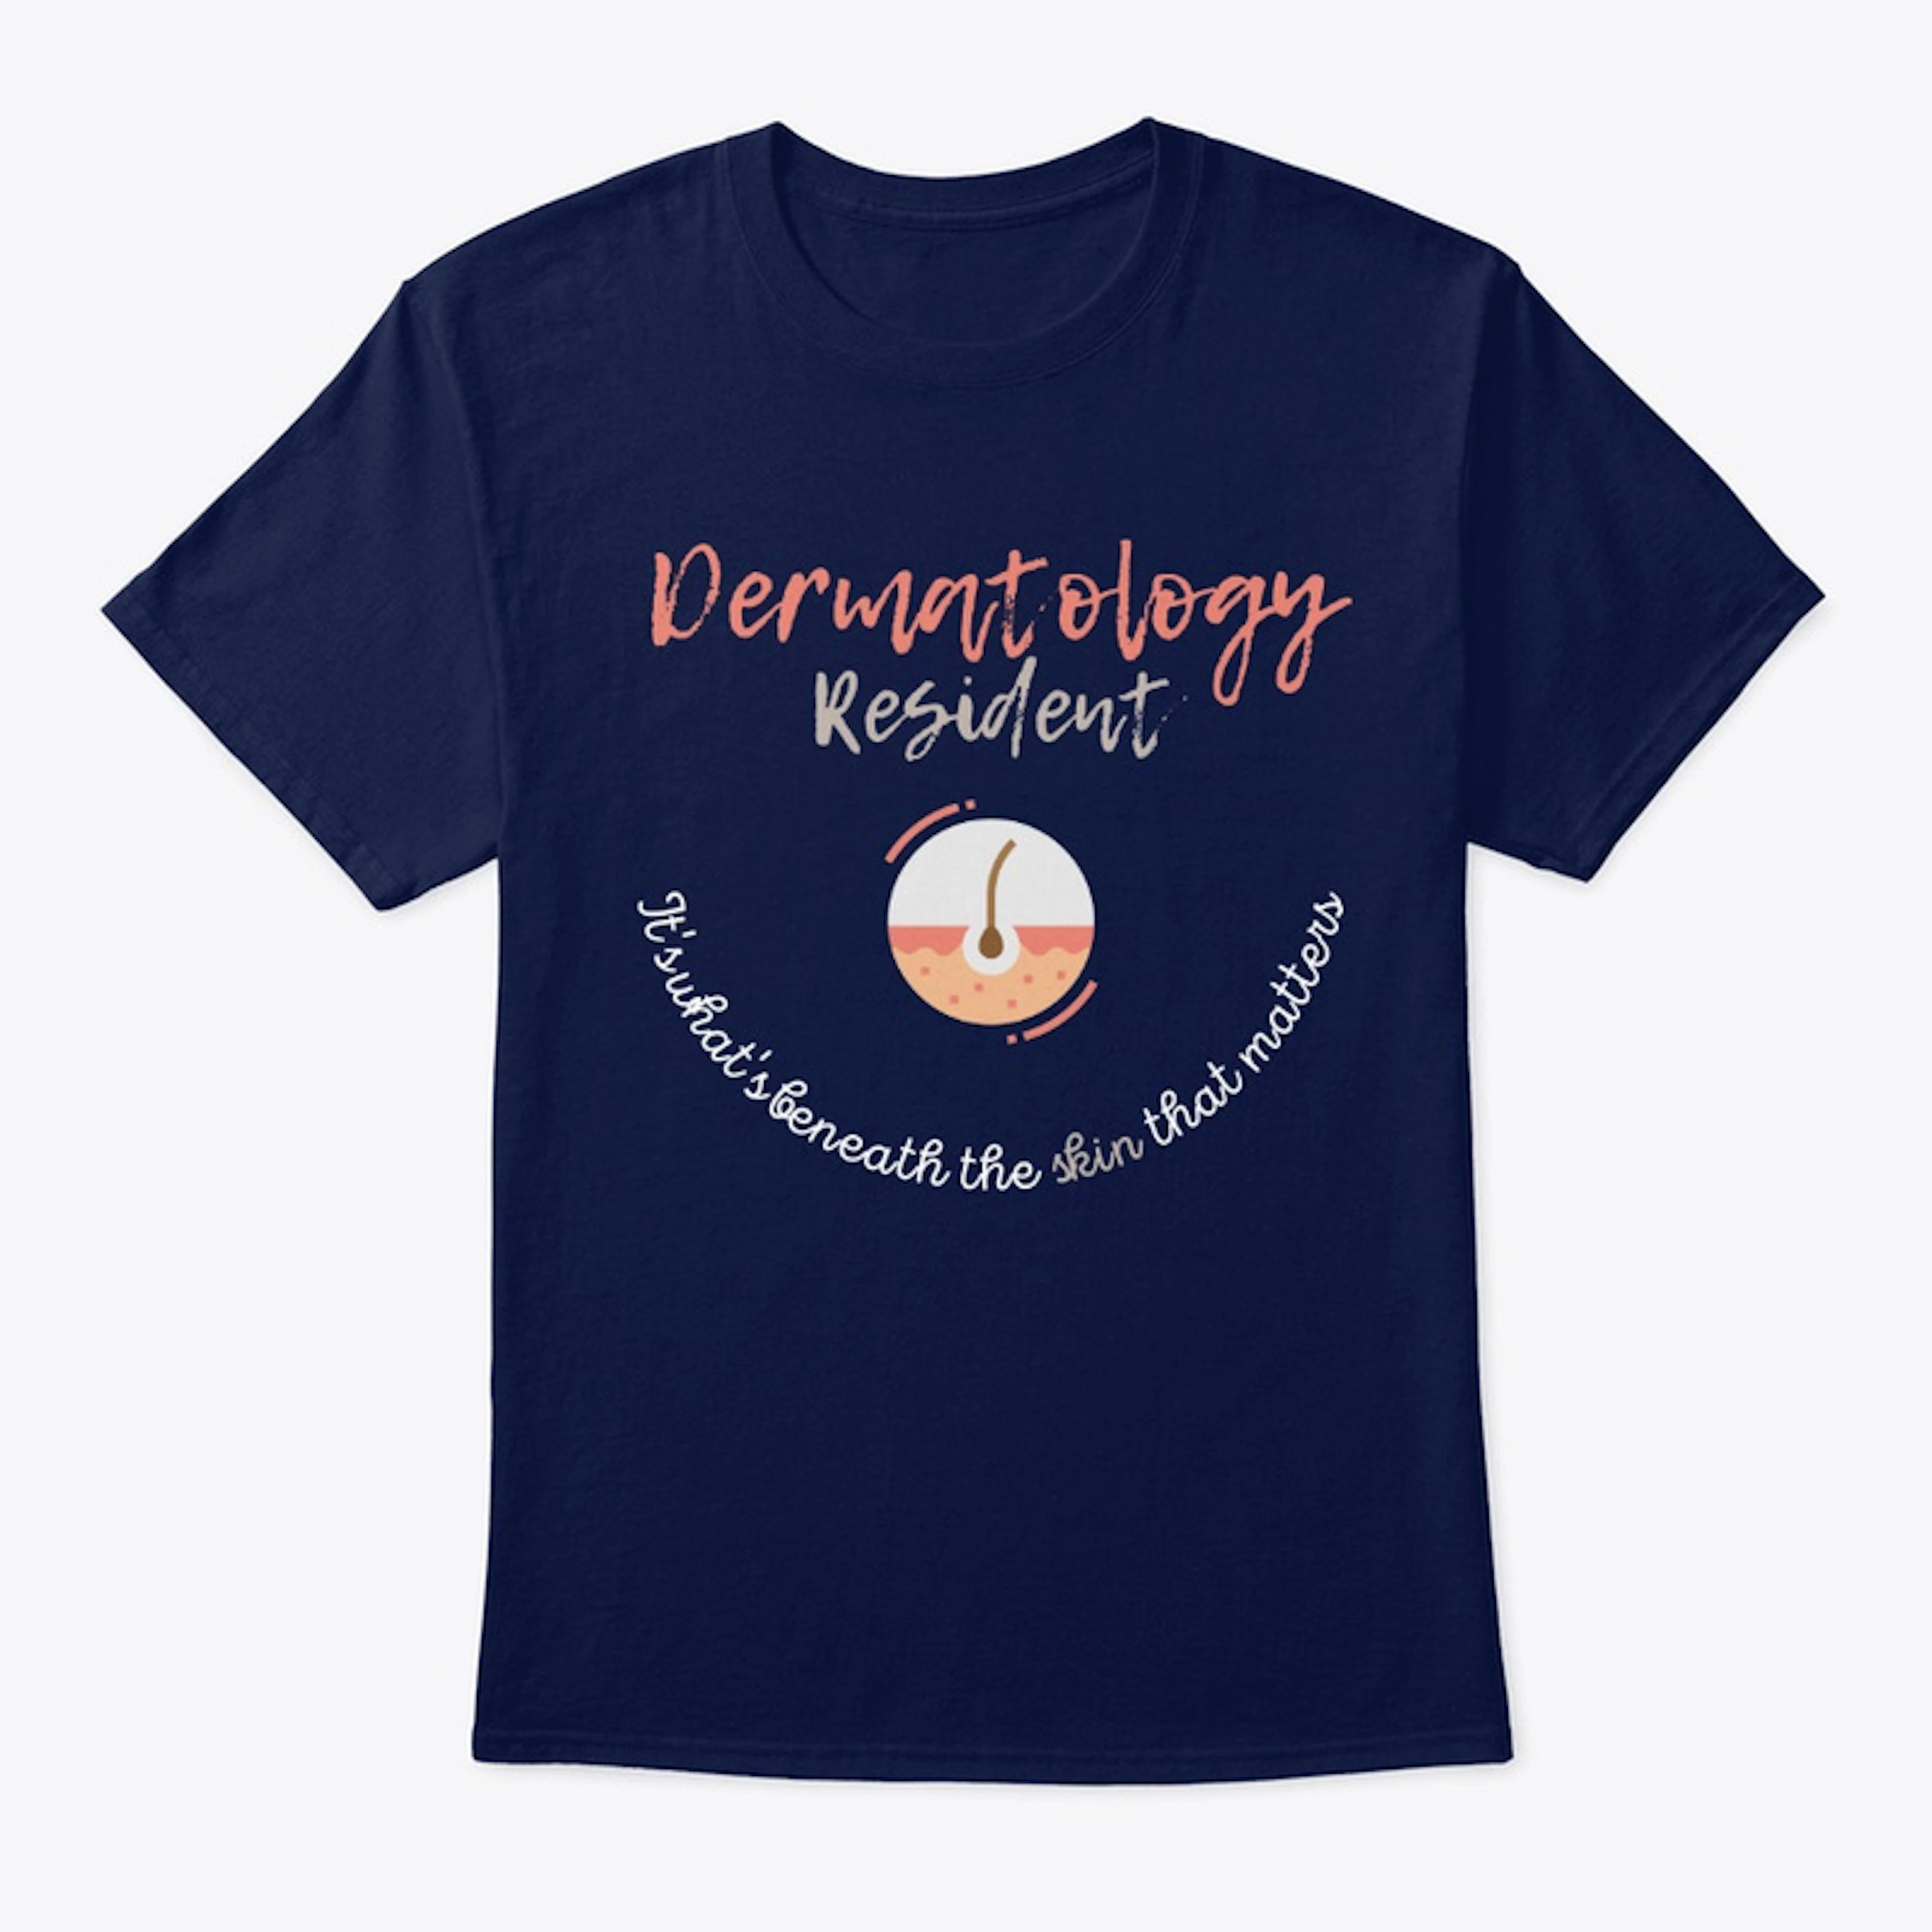 The Dermatology Resident (multi colors)